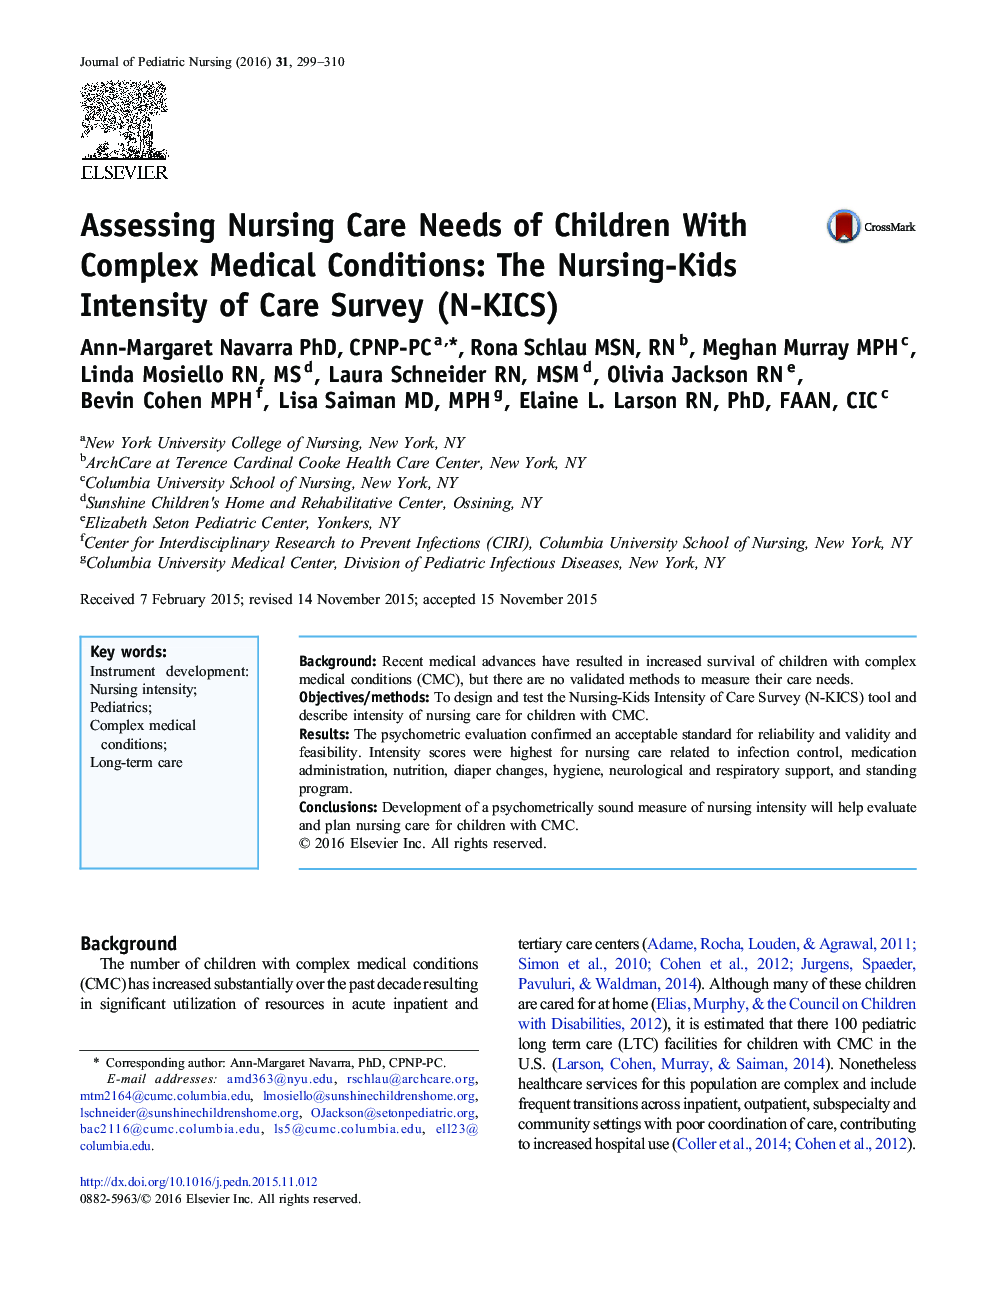 Assessing Nursing Care Needs of Children With Complex Medical Conditions: The Nursing-Kids Intensity of Care Survey (N-KICS)